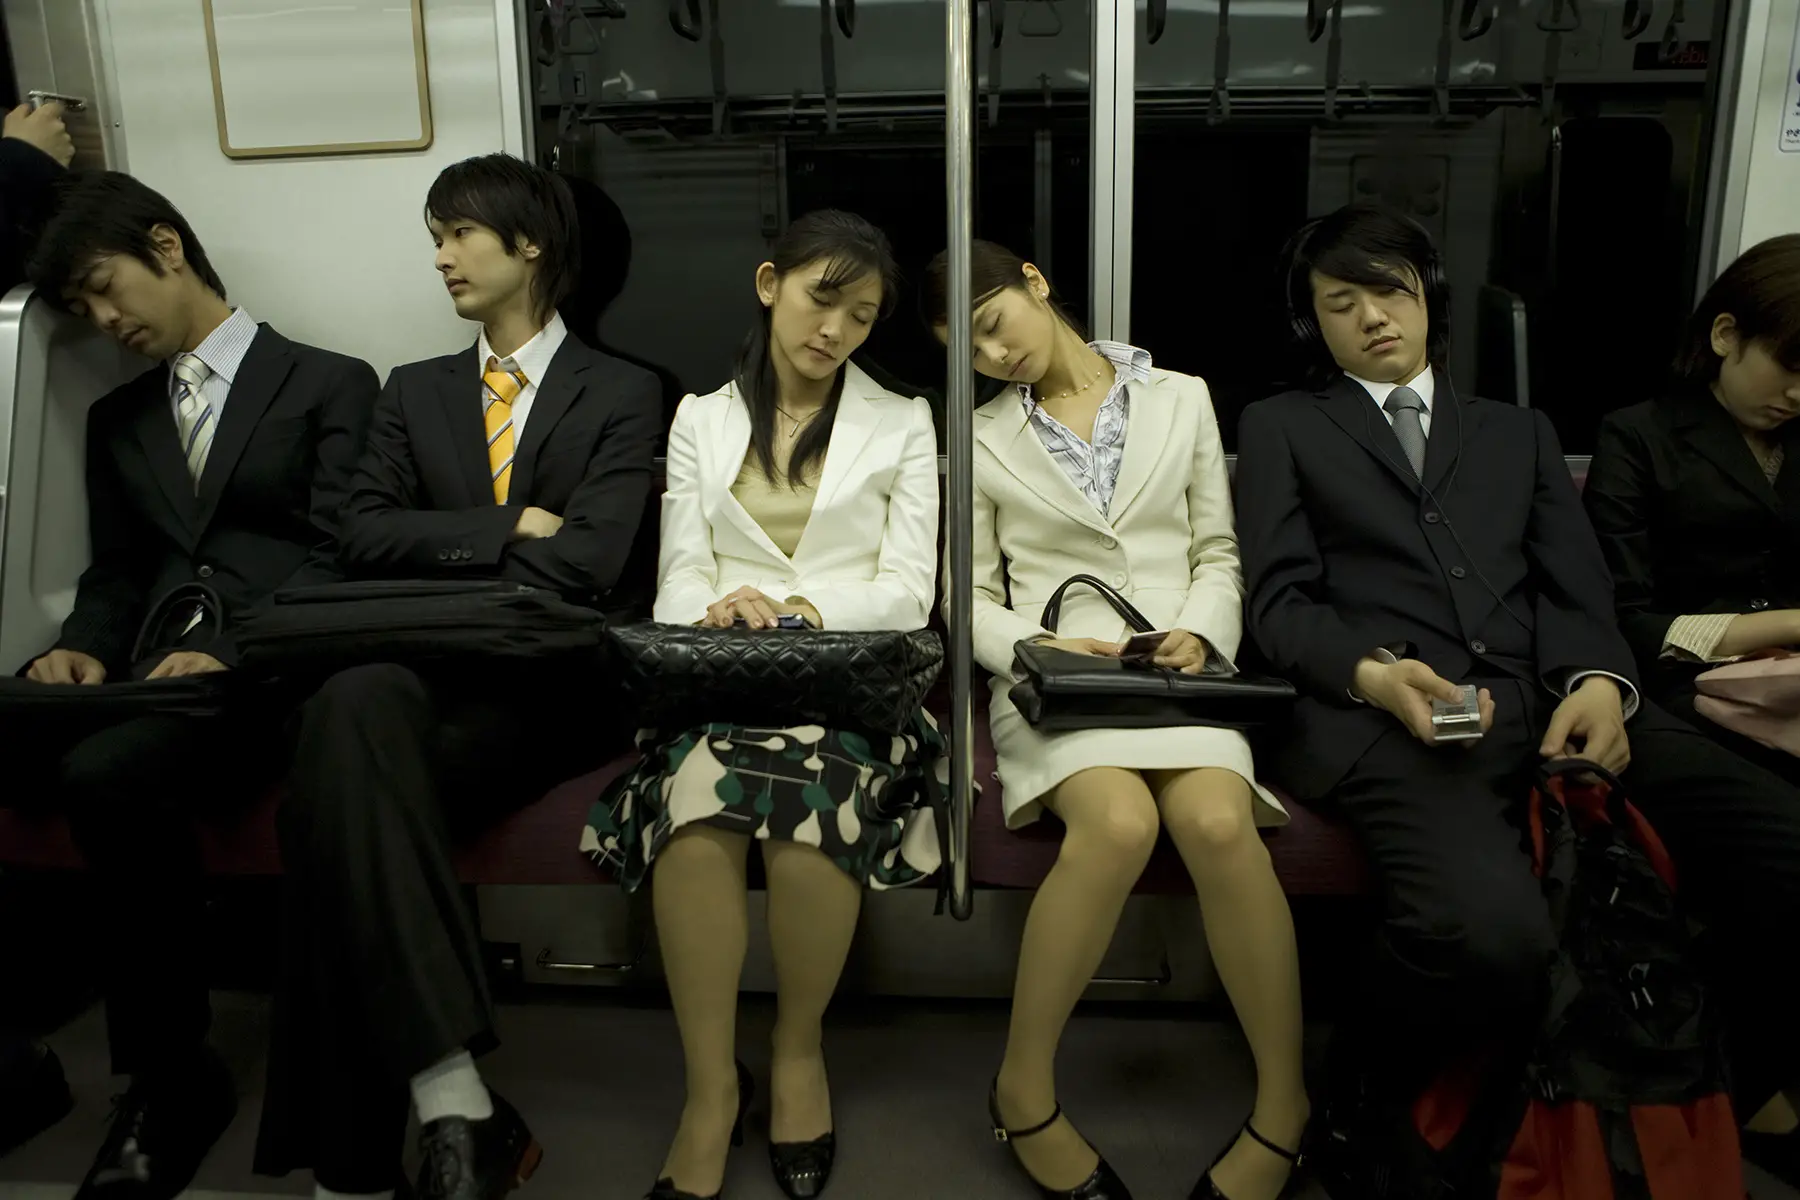 People commuting back from work sleeping on the train